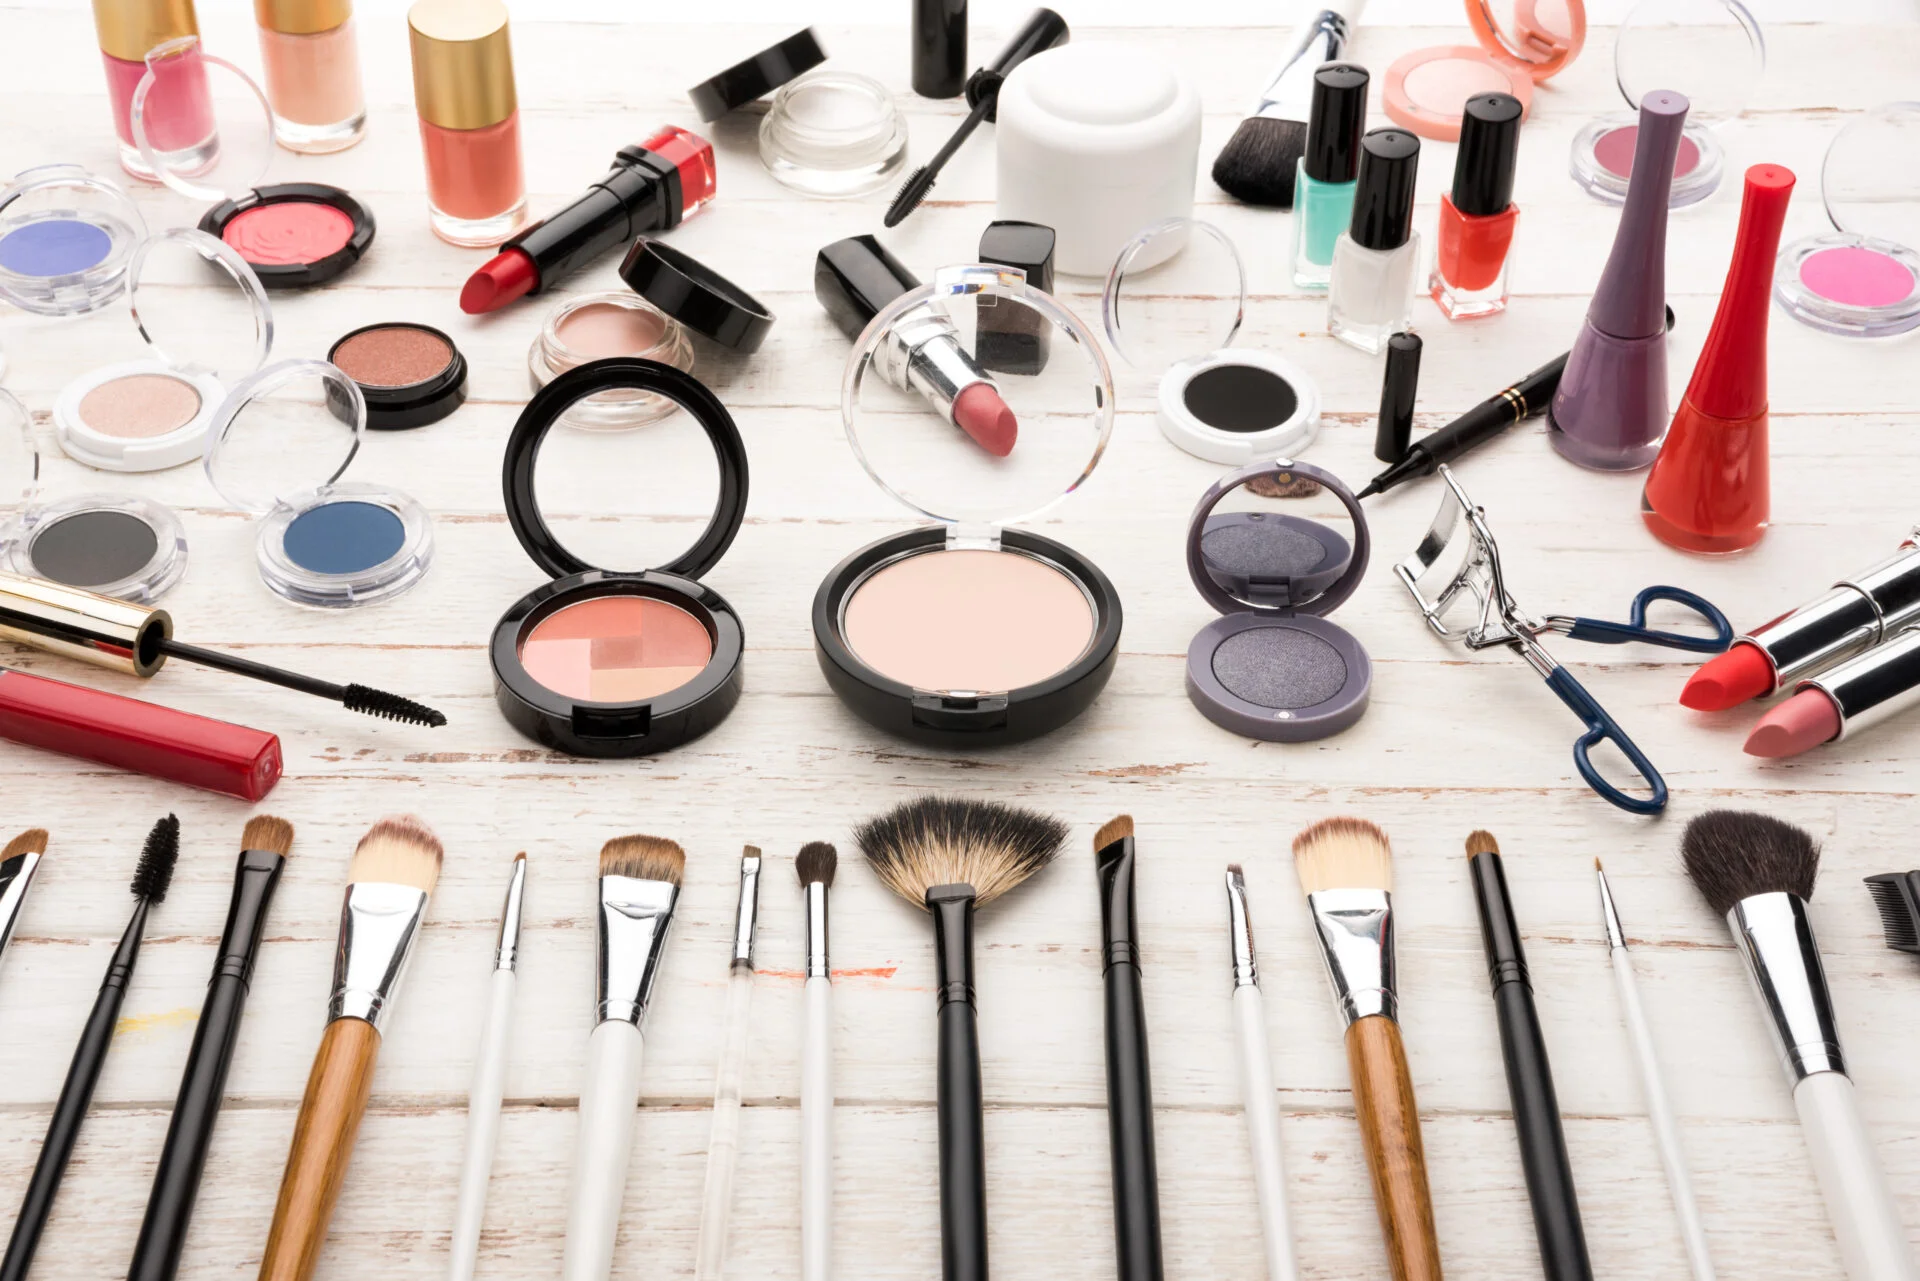 Green beauty cosmetics testing for PFAS forever chemicals